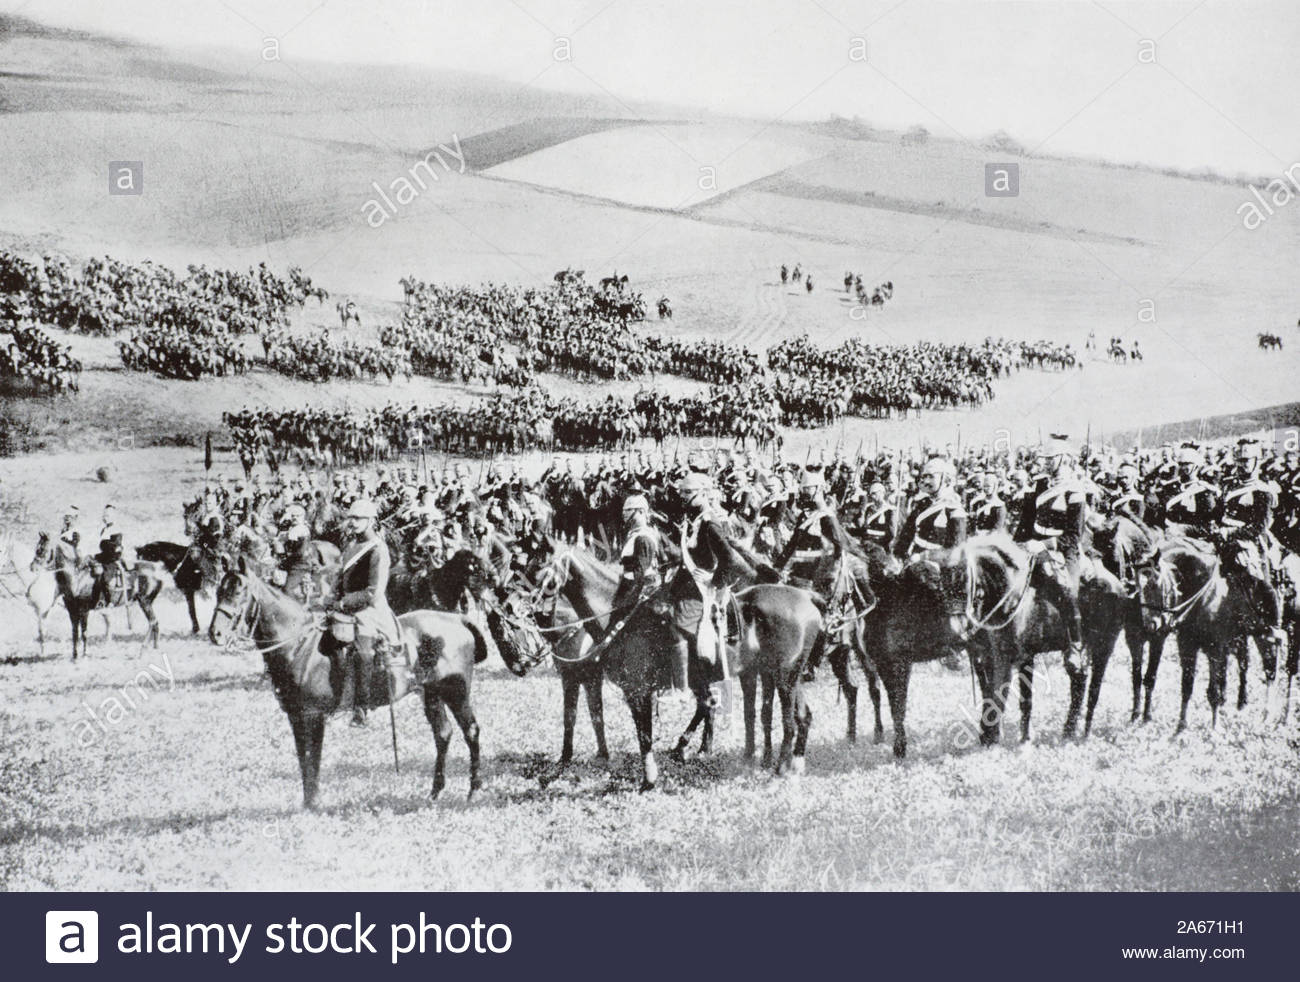 WW1 German Cavalry division on parade, vintage photograph from 1914 Stock Photo